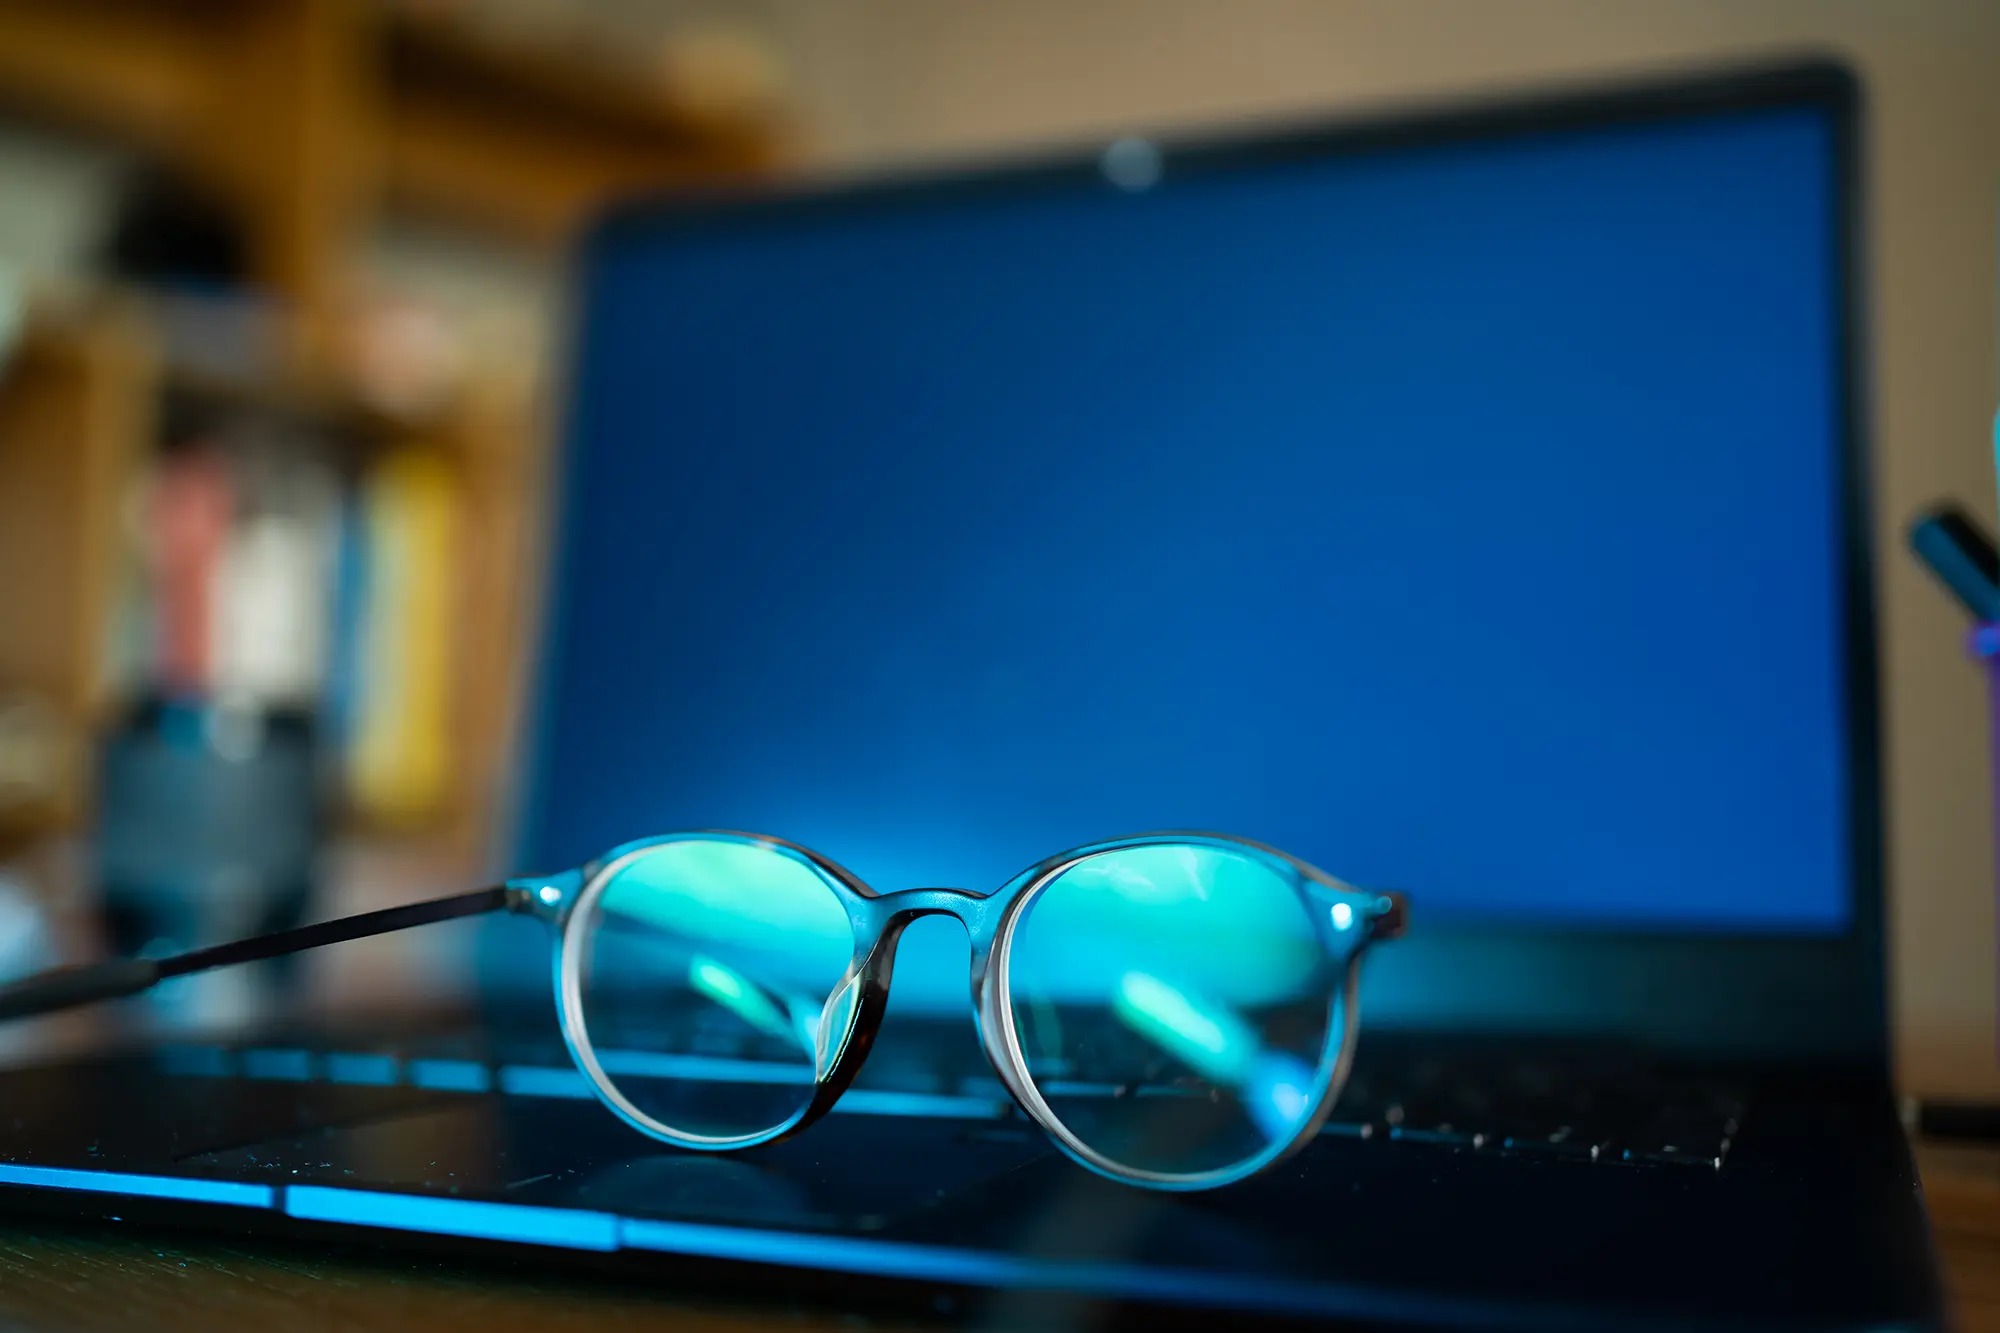 Filter Removal: Steps For Removing The Blue Light Filter From Glasses